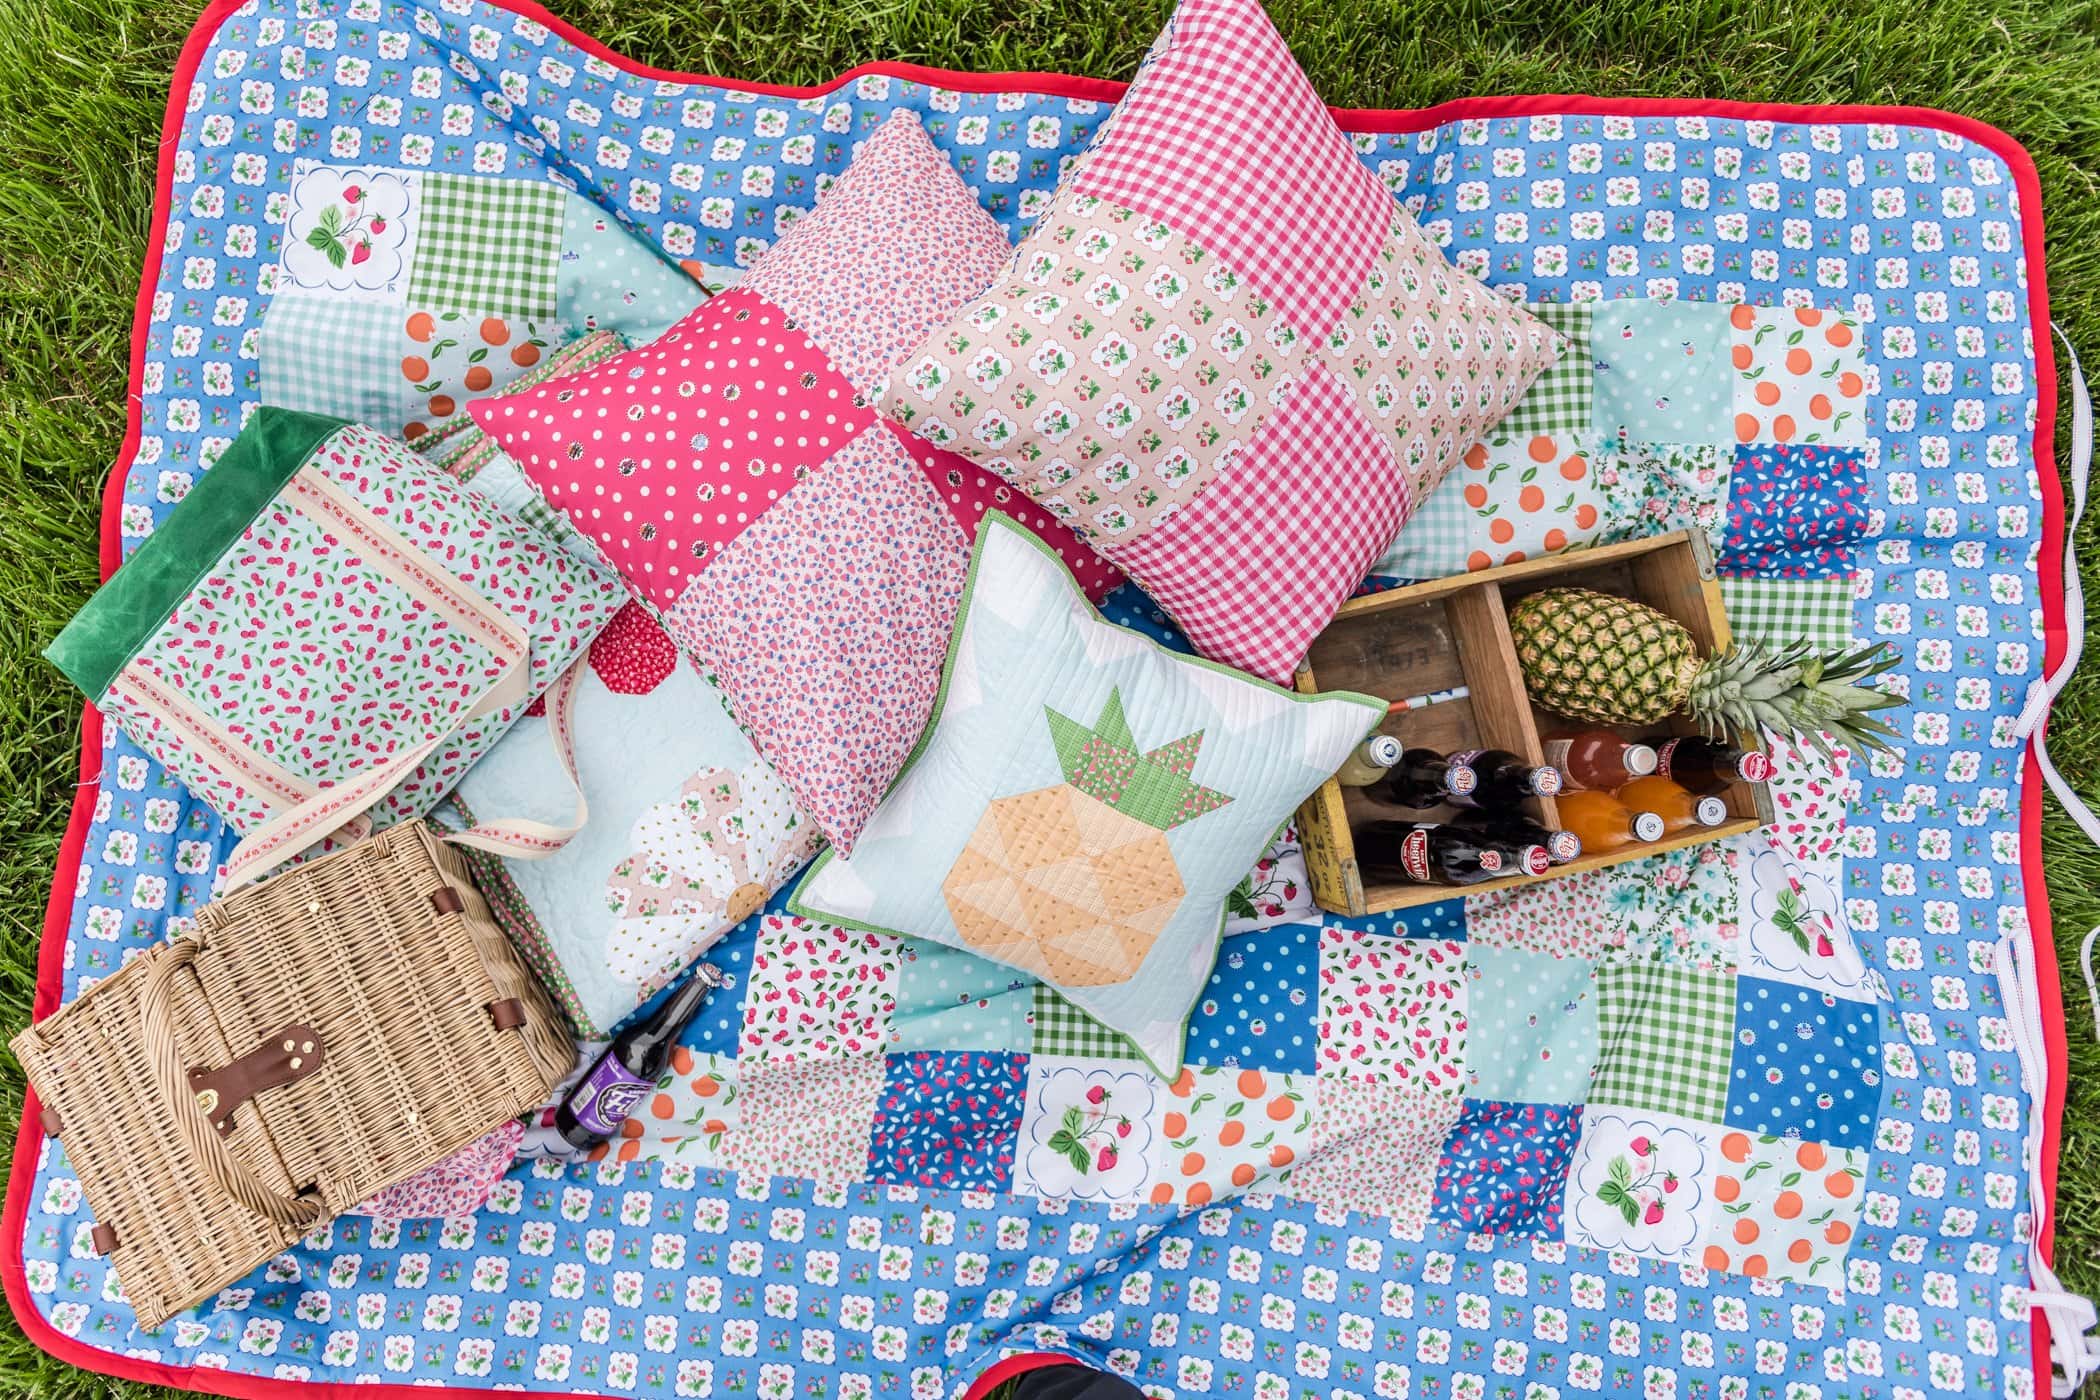 colorful pillows and picnic essentials on blanket outdoors